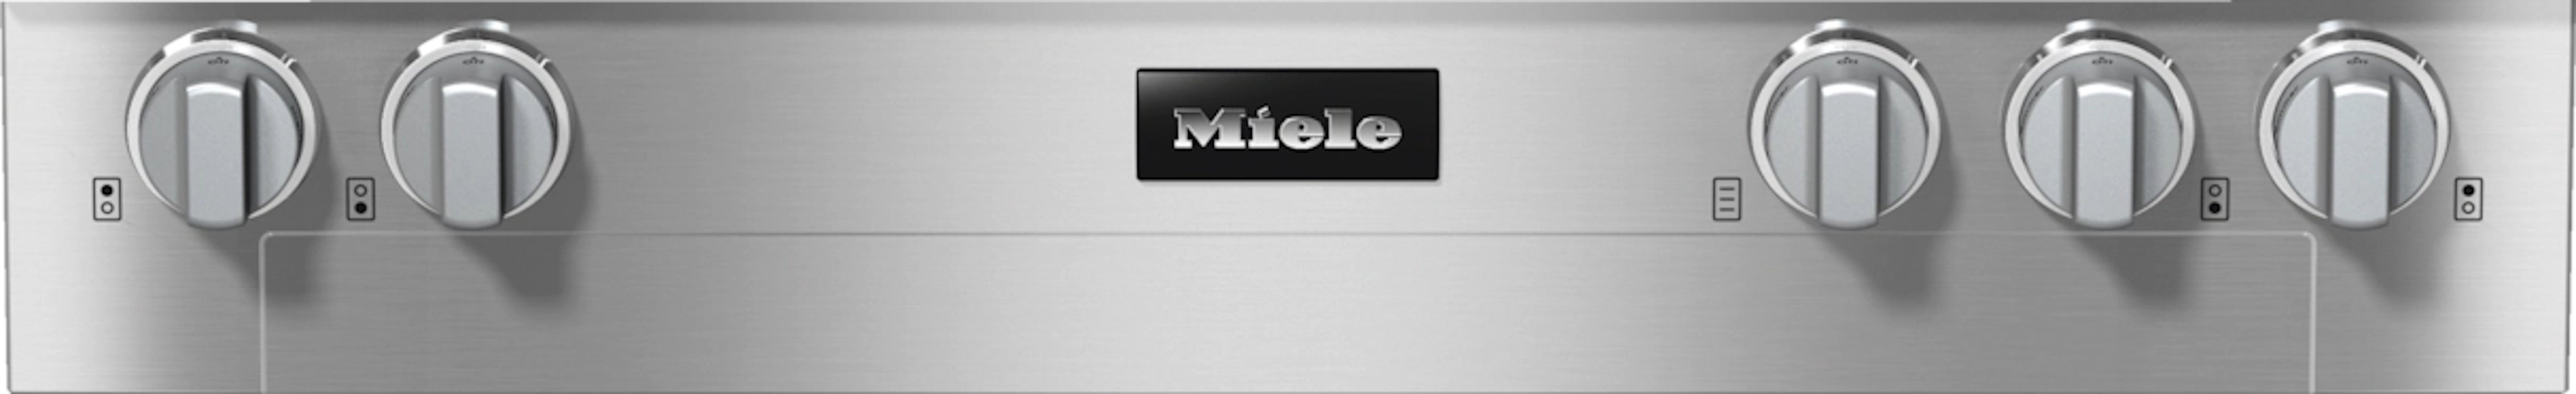 Miele - 36 Inch Gas Cooktop in Stainless - KMR 1136-3 G GD